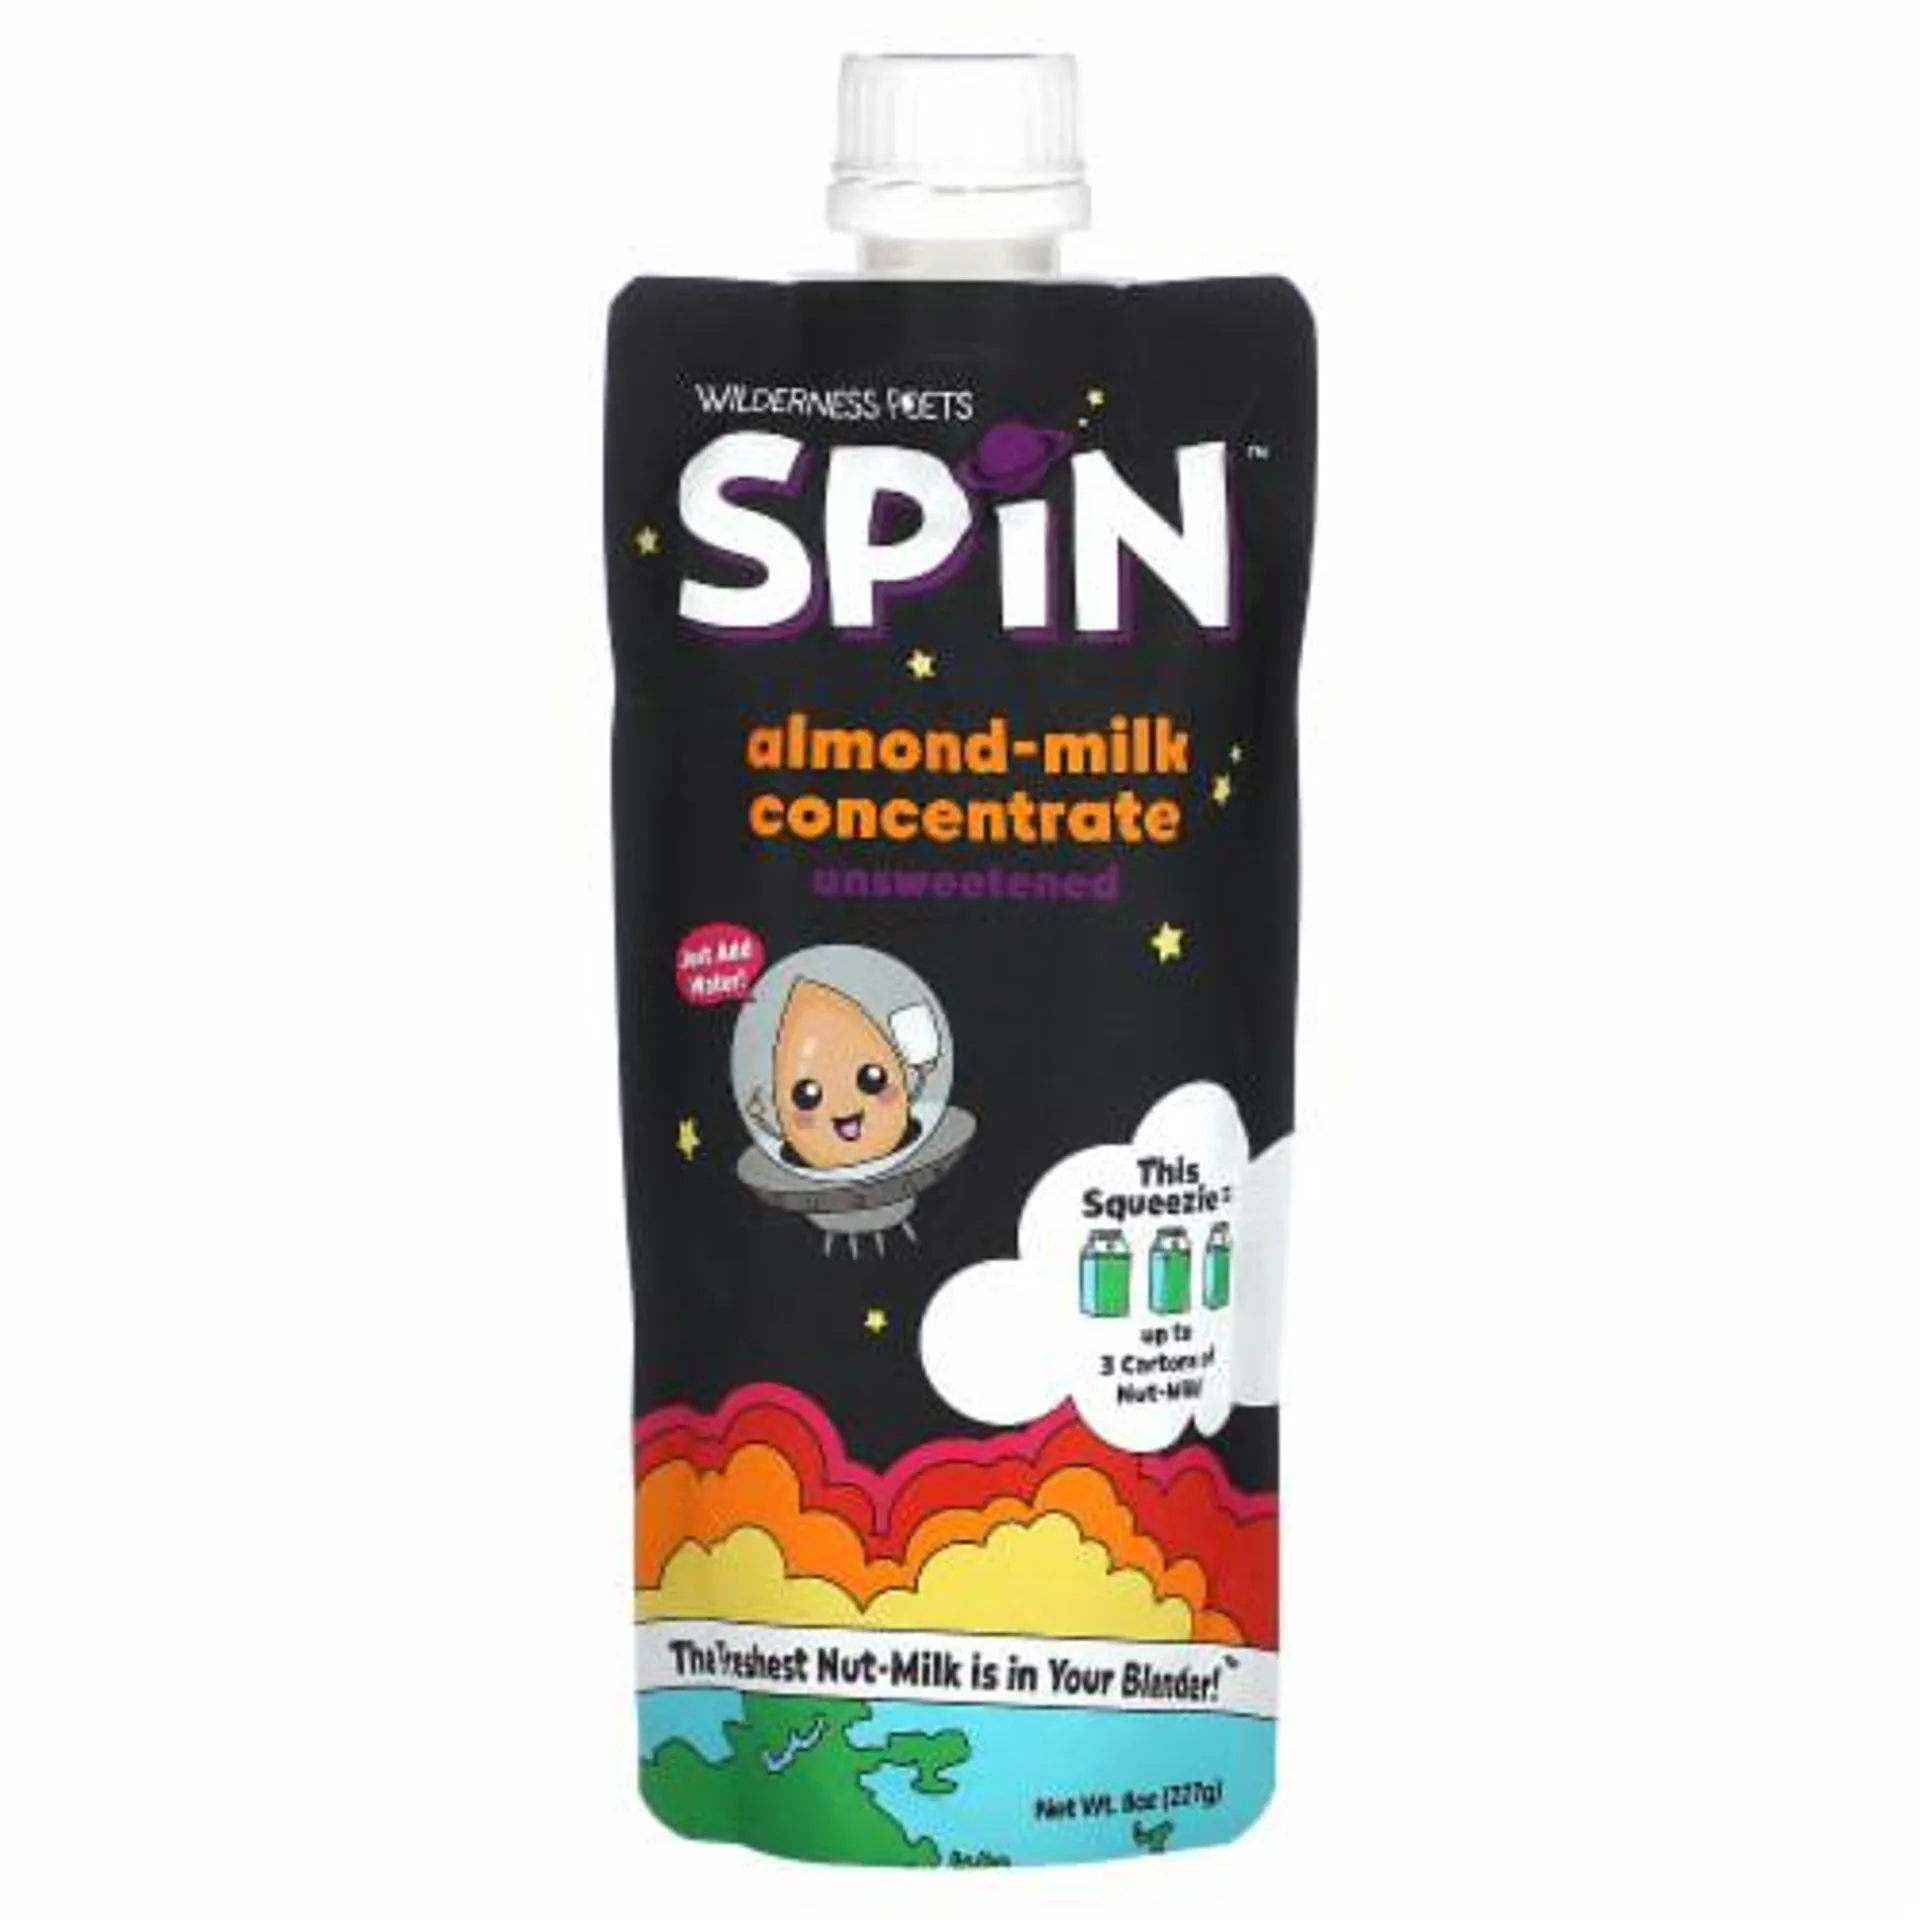 Wilderness Poets SPiN, Almond Milk Concentrate (Unsweetened) - 14 Servings - Make Almond Milk